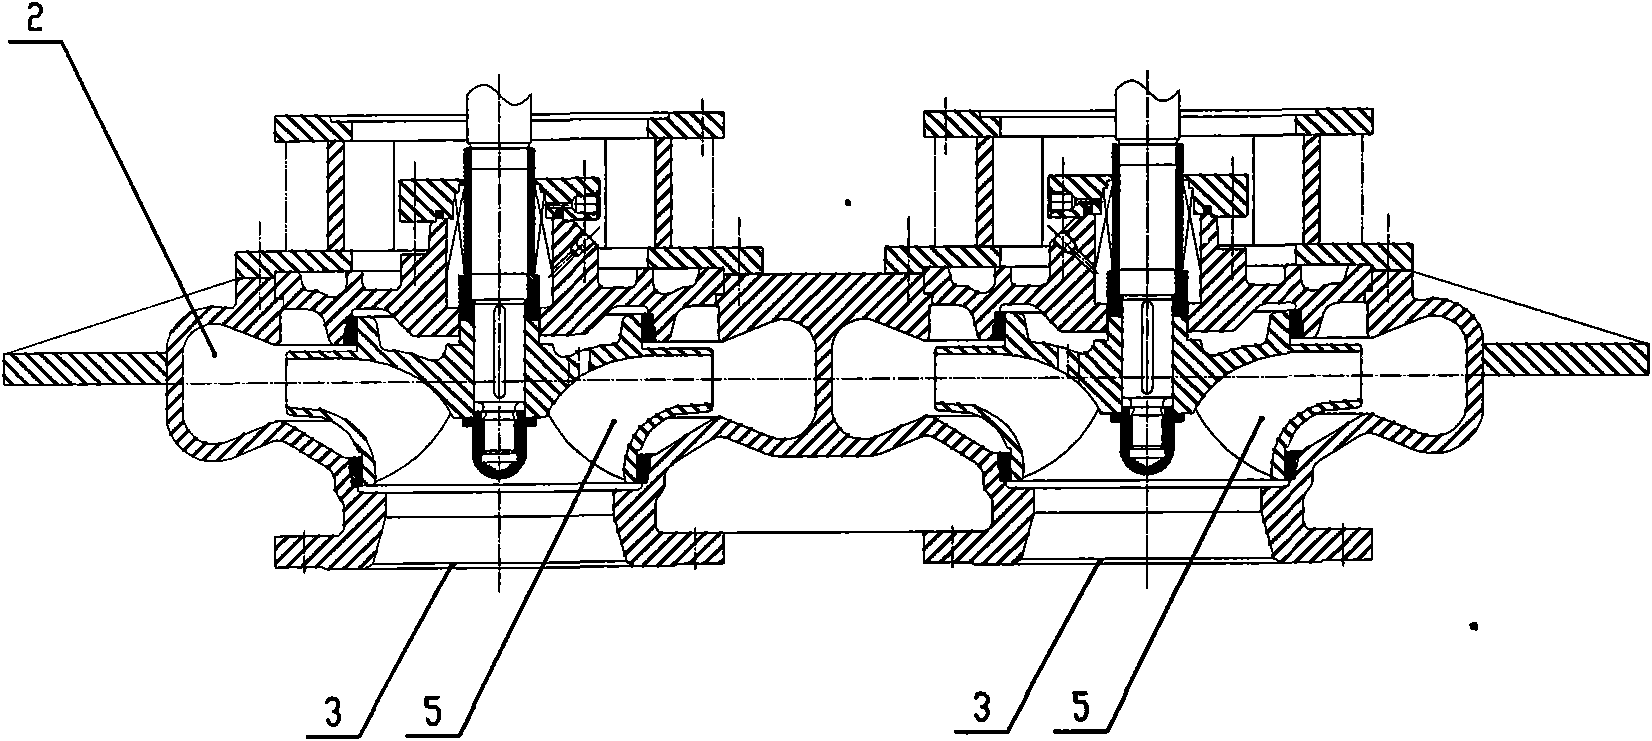 Turbine parallel multiple-suction single-discharge vertical-type lifting pump